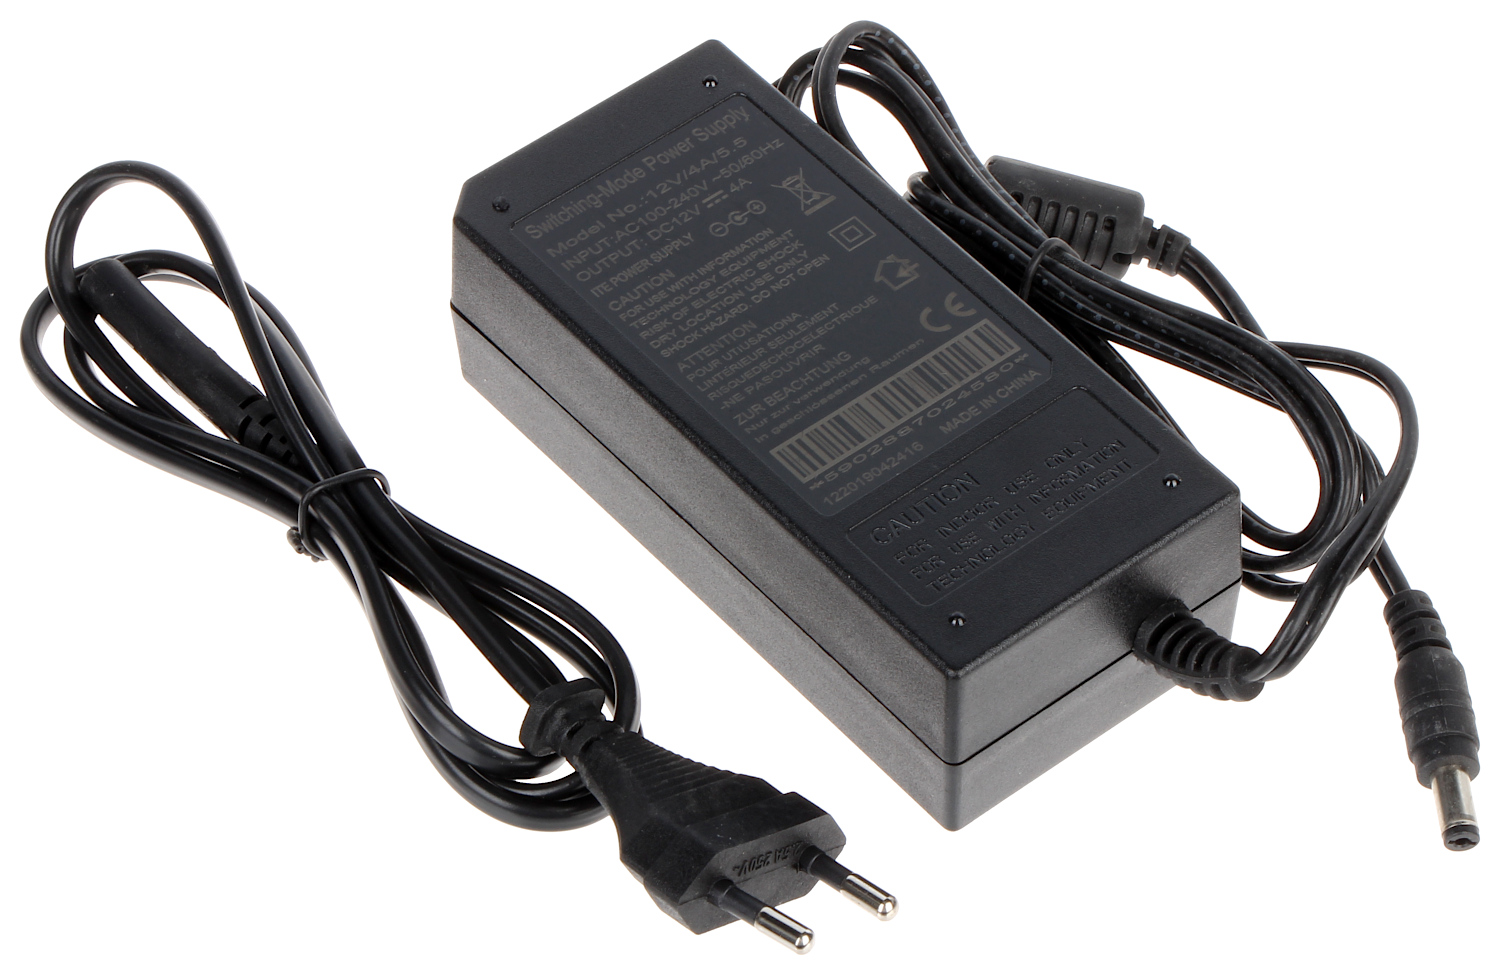 POWER SUPPLY ADAPTER 12V/4A/5.5 - With plug, indoor - Delta